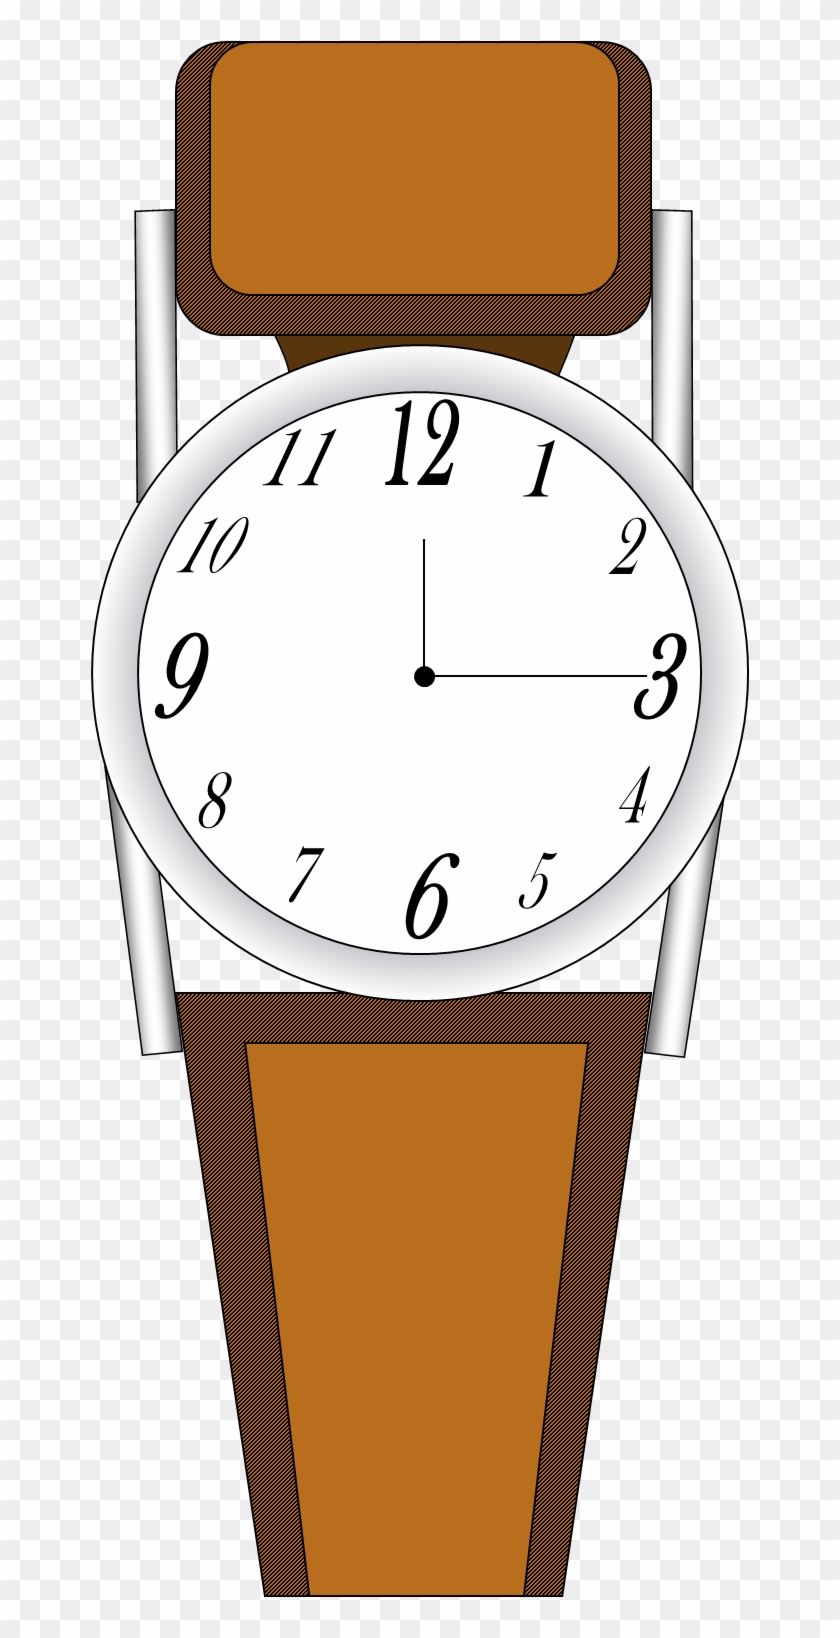 Watch Image - B W Clipart Of Watch - Png Download #2100278